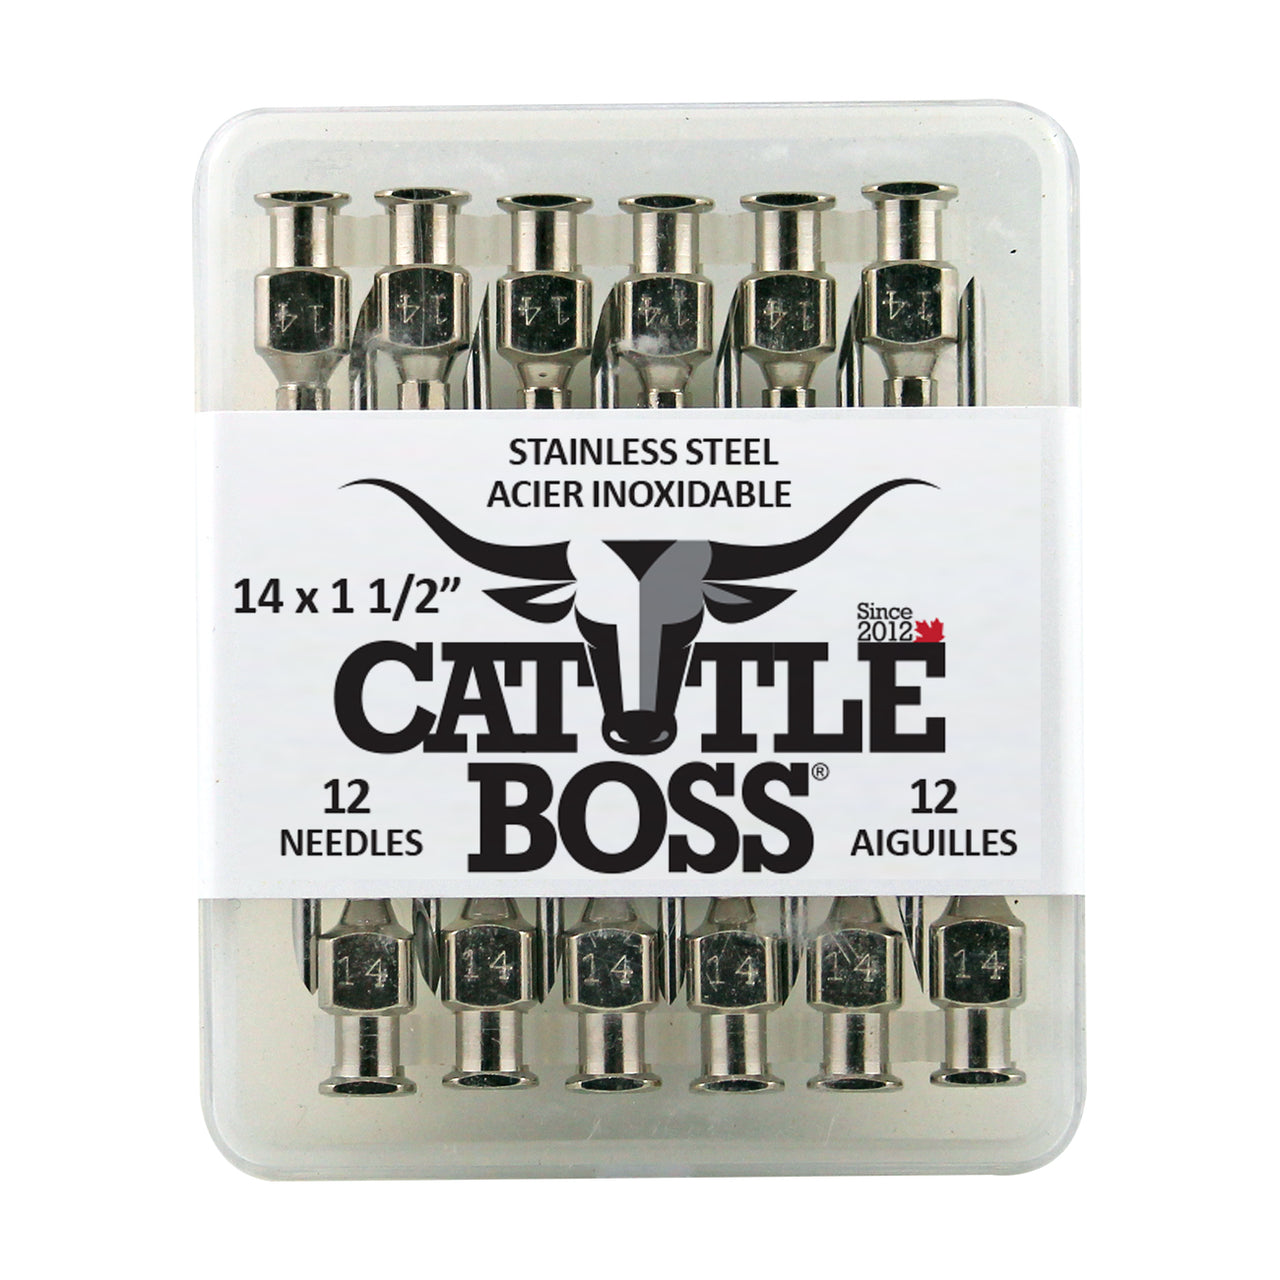 Cattle Boss Stainless Steel Hub Needle (12 Pack) 14X1 1/2 - Drug Administration Cattle Boss - Canada